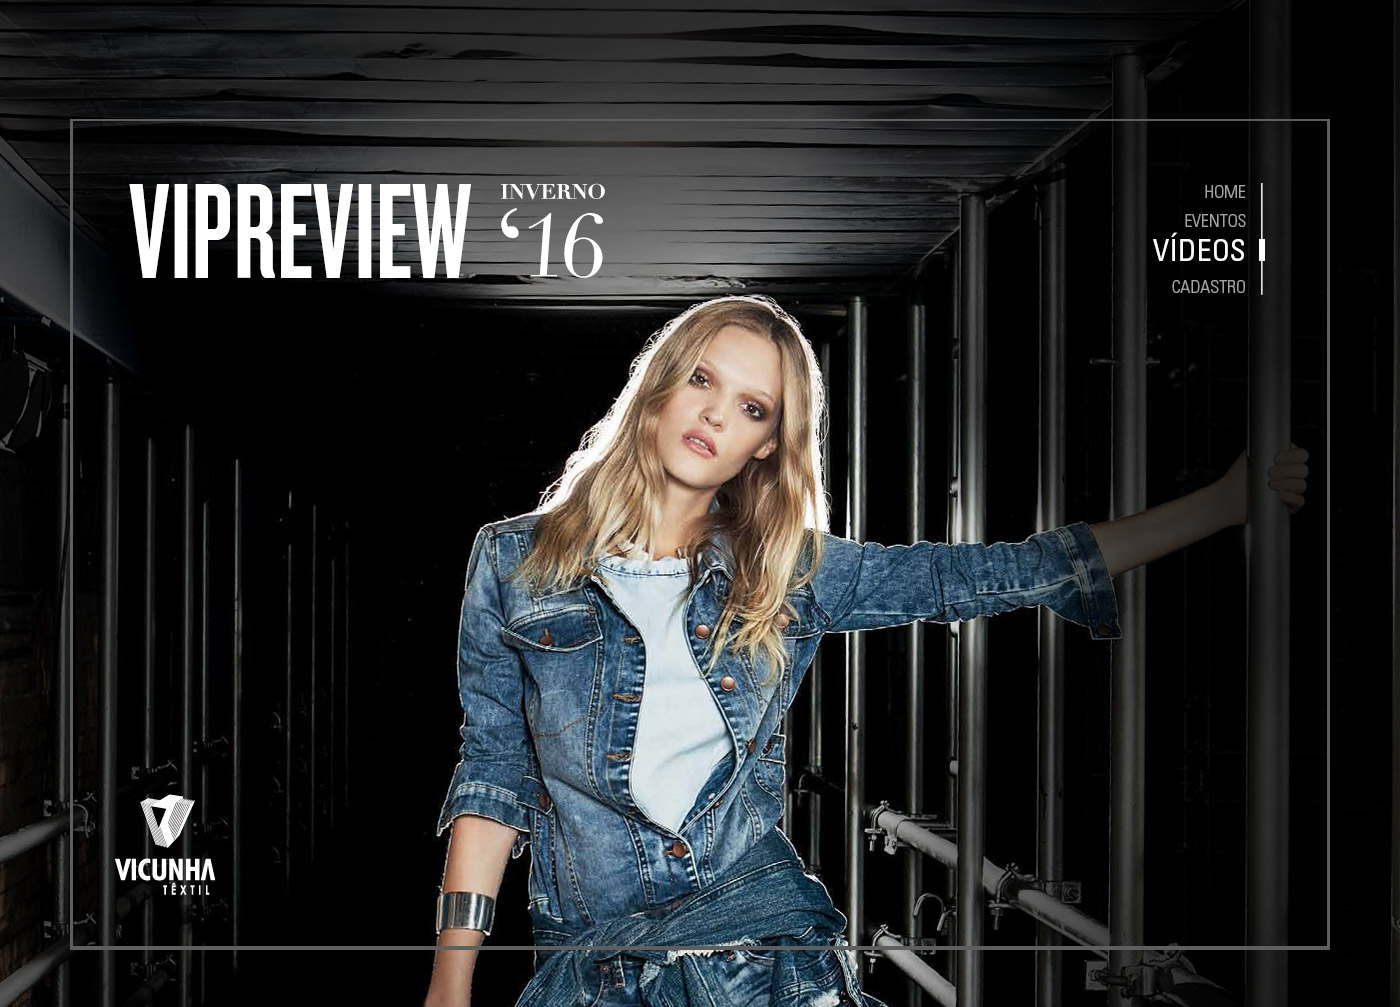 Website single page layout Denim jeans Vicunha vipreview Clothing